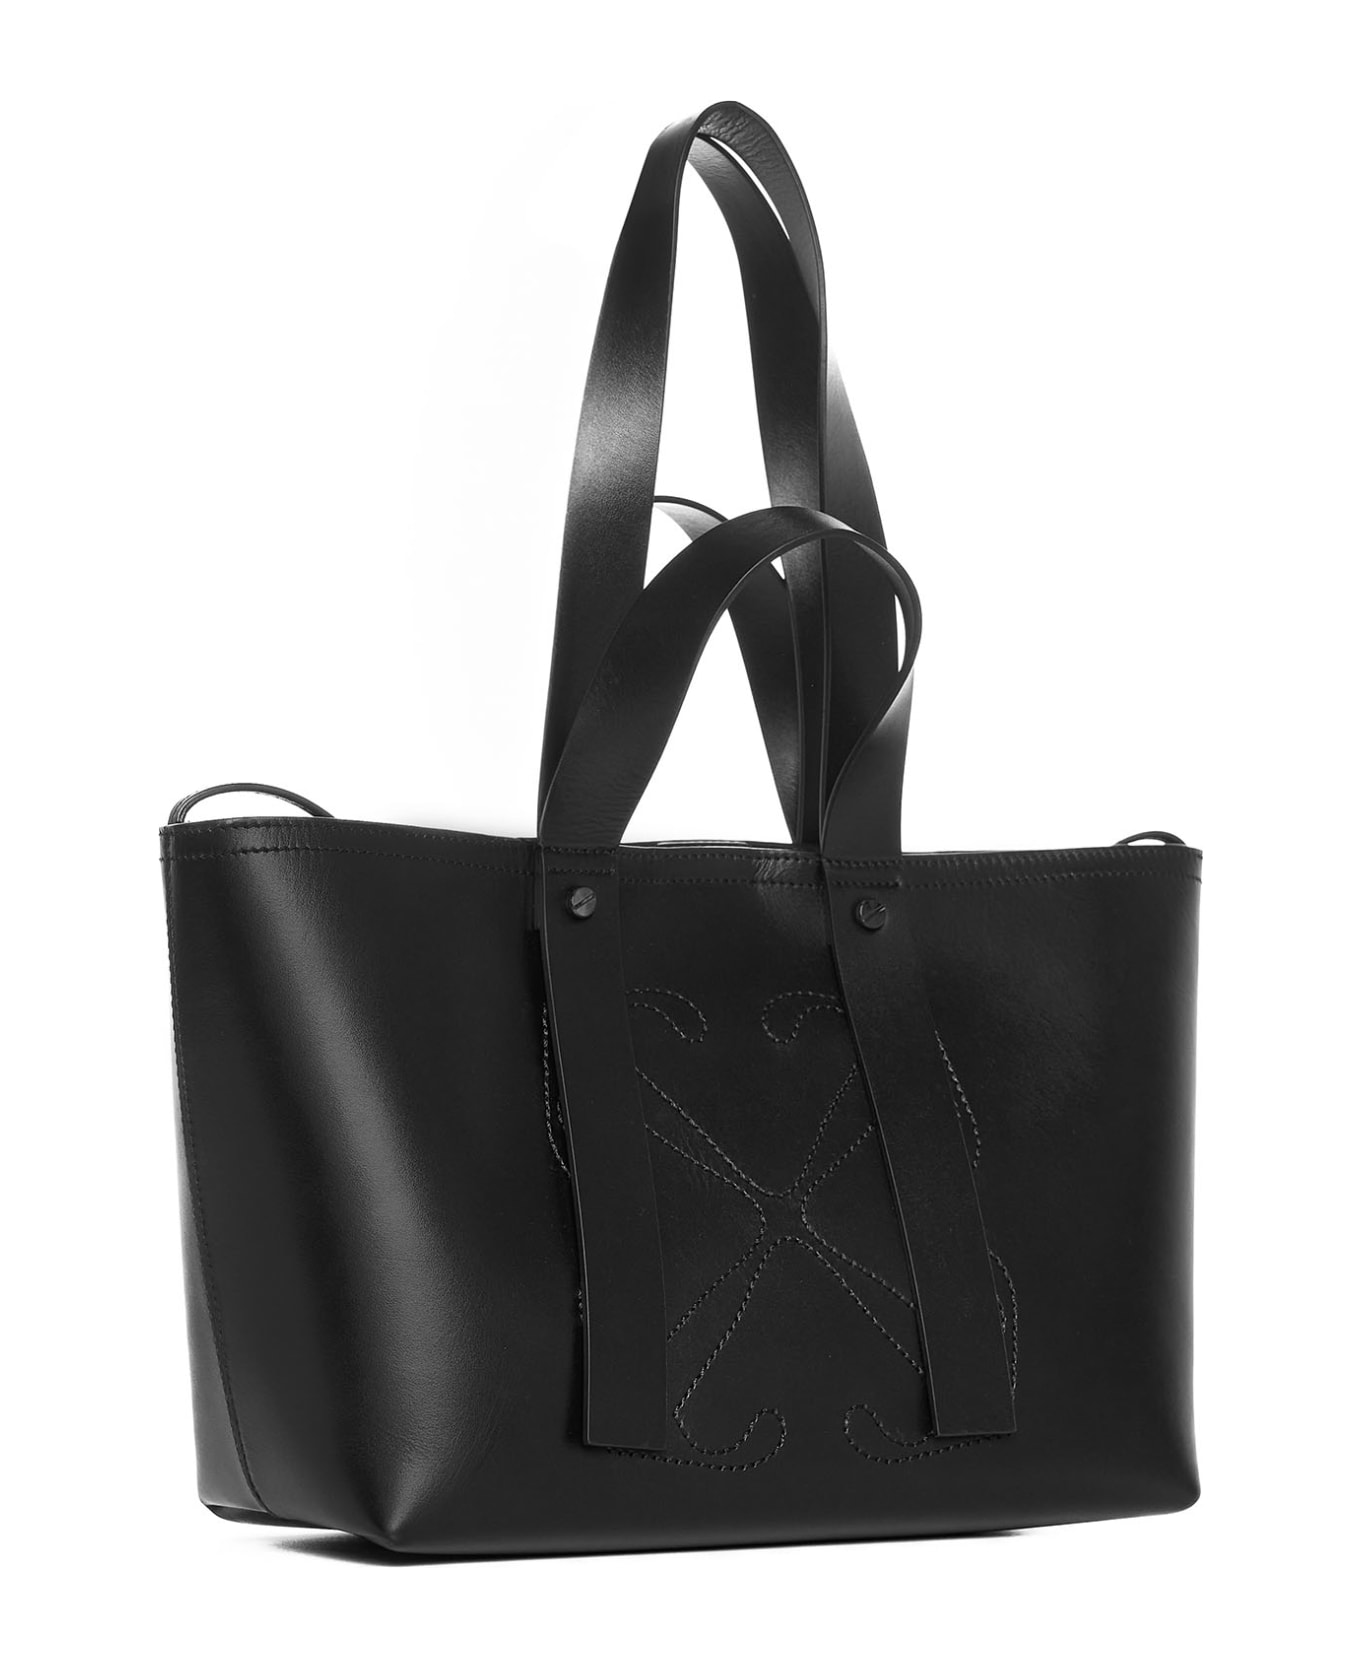 Off-White Day Off Shopping Bag - Black no color トートバッグ